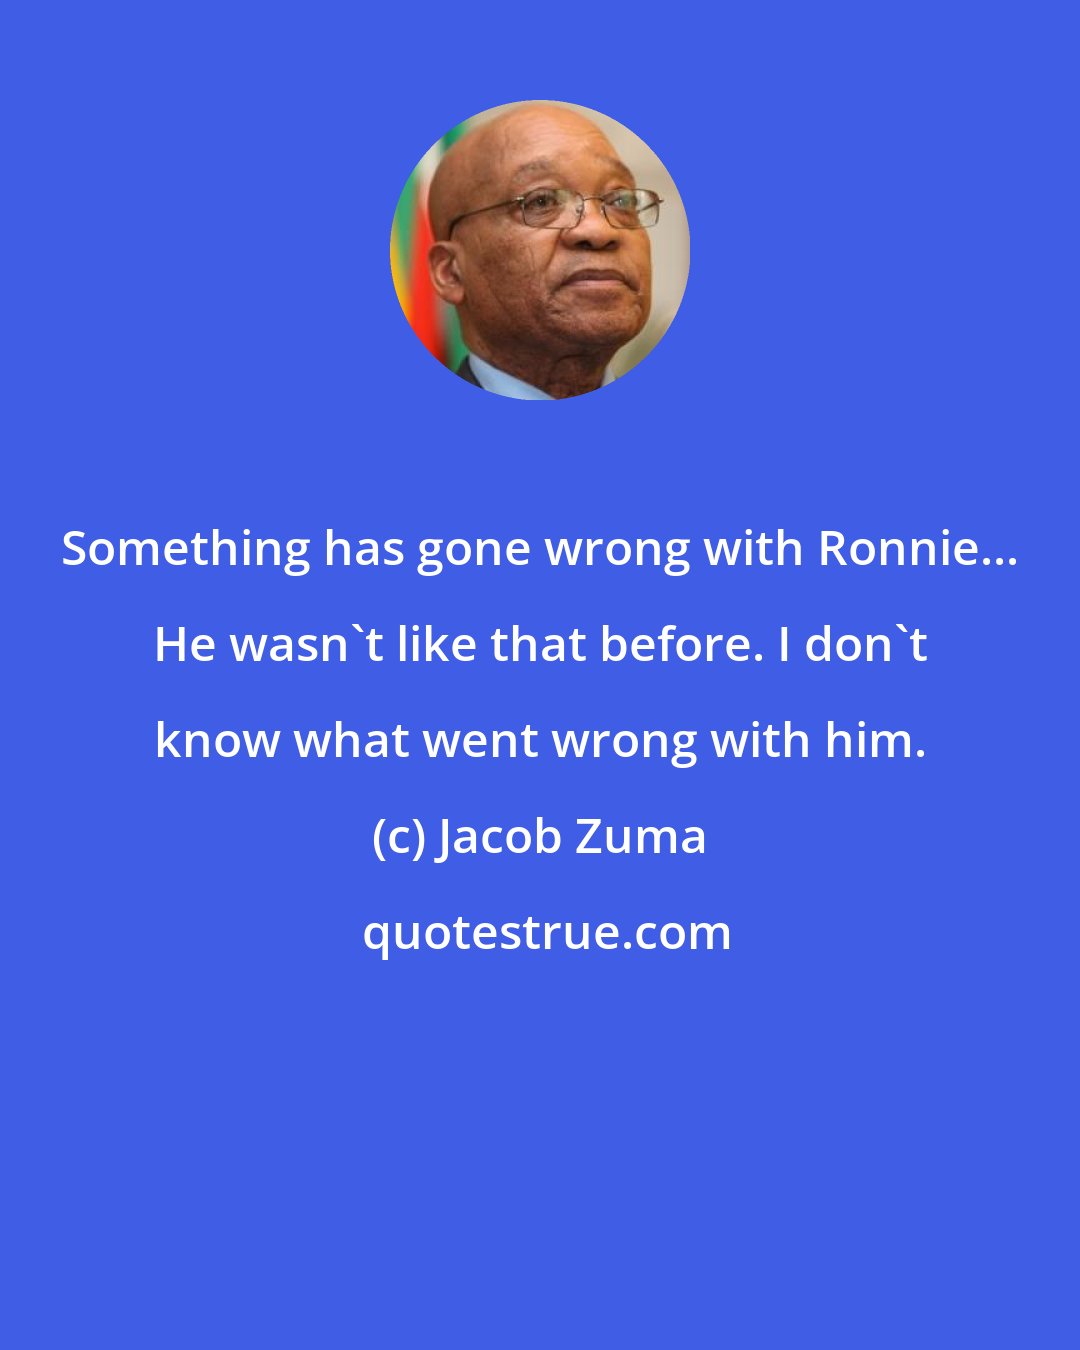 Jacob Zuma: Something has gone wrong with Ronnie... He wasn't like that before. I don't know what went wrong with him.